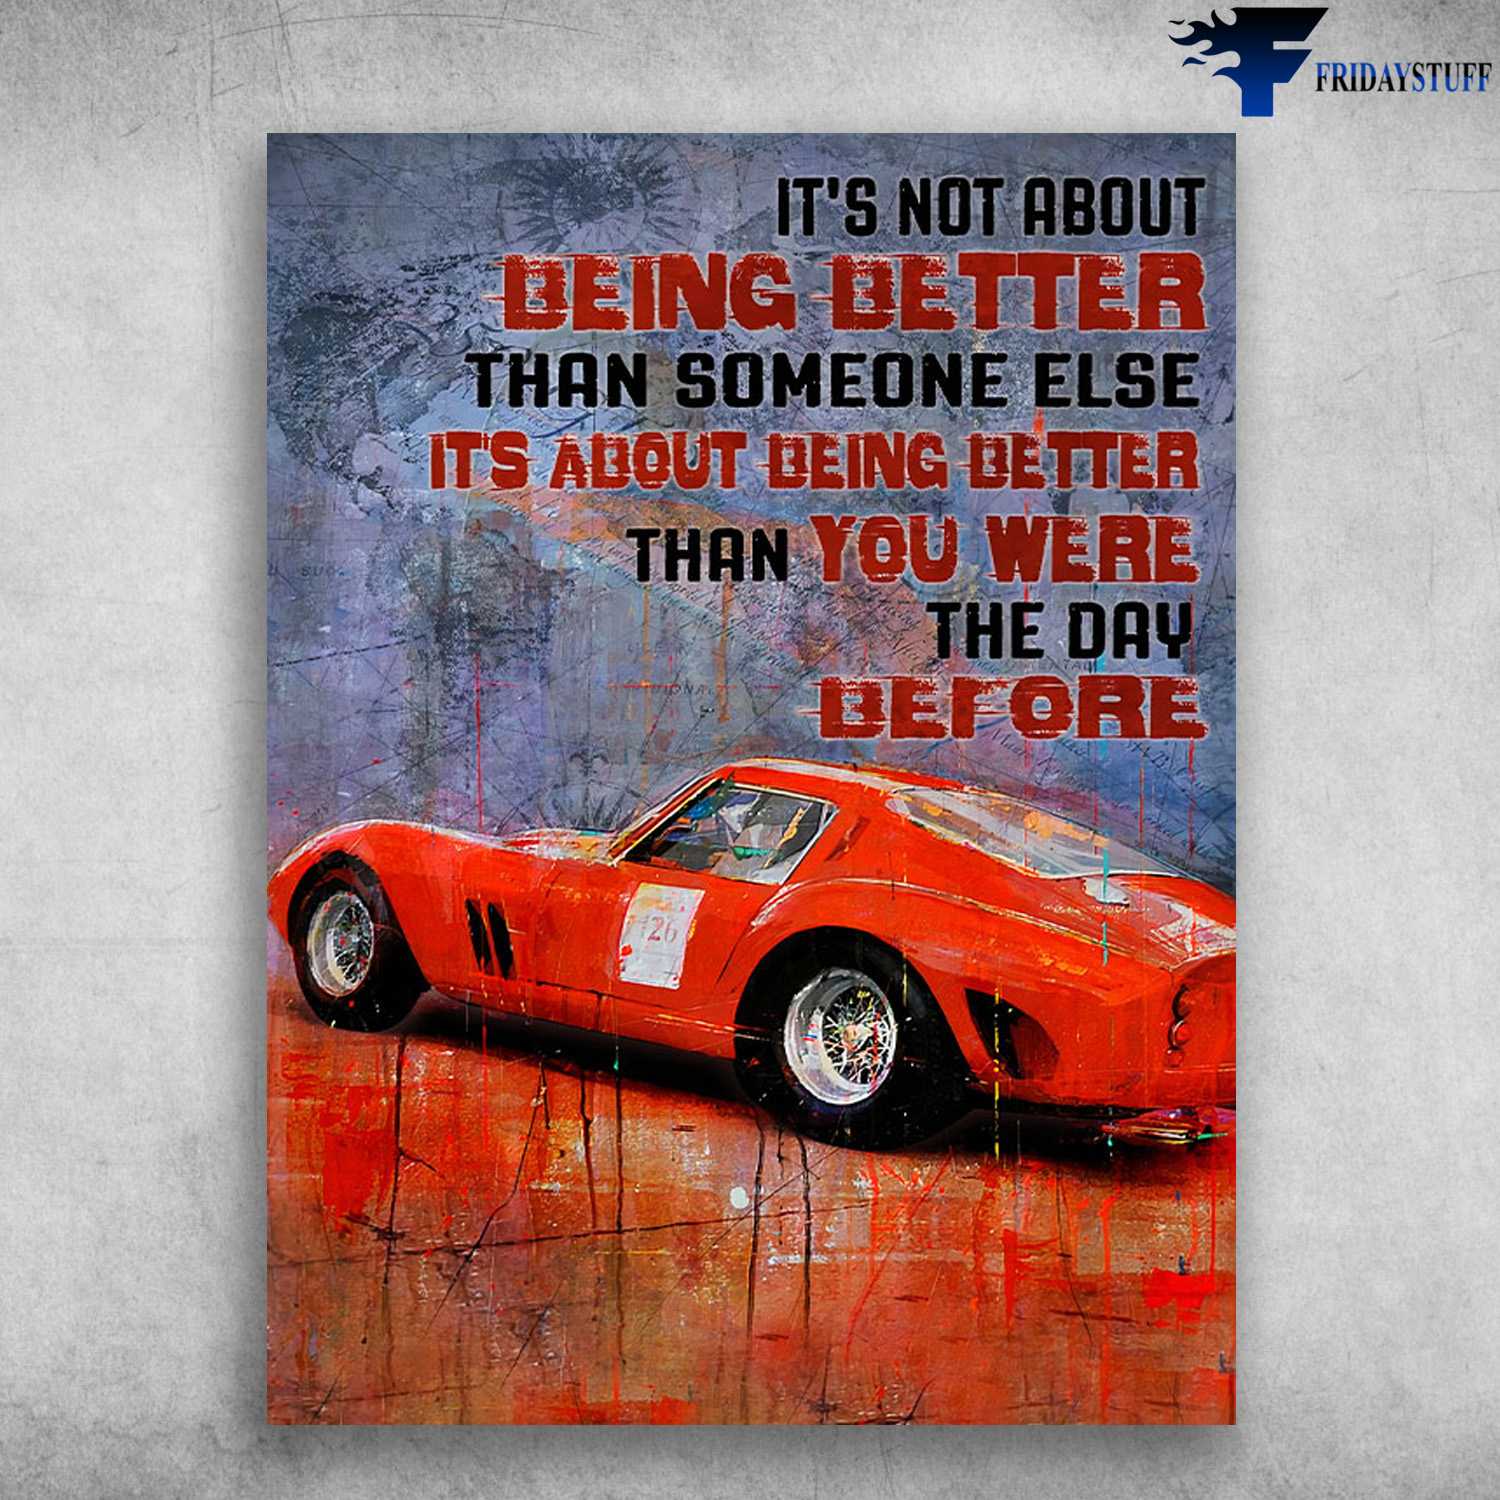 Car Riding, Car Lover - It's Not About Being Better, Than Someone Else, It's About Being Better, Than You Were The Day Before